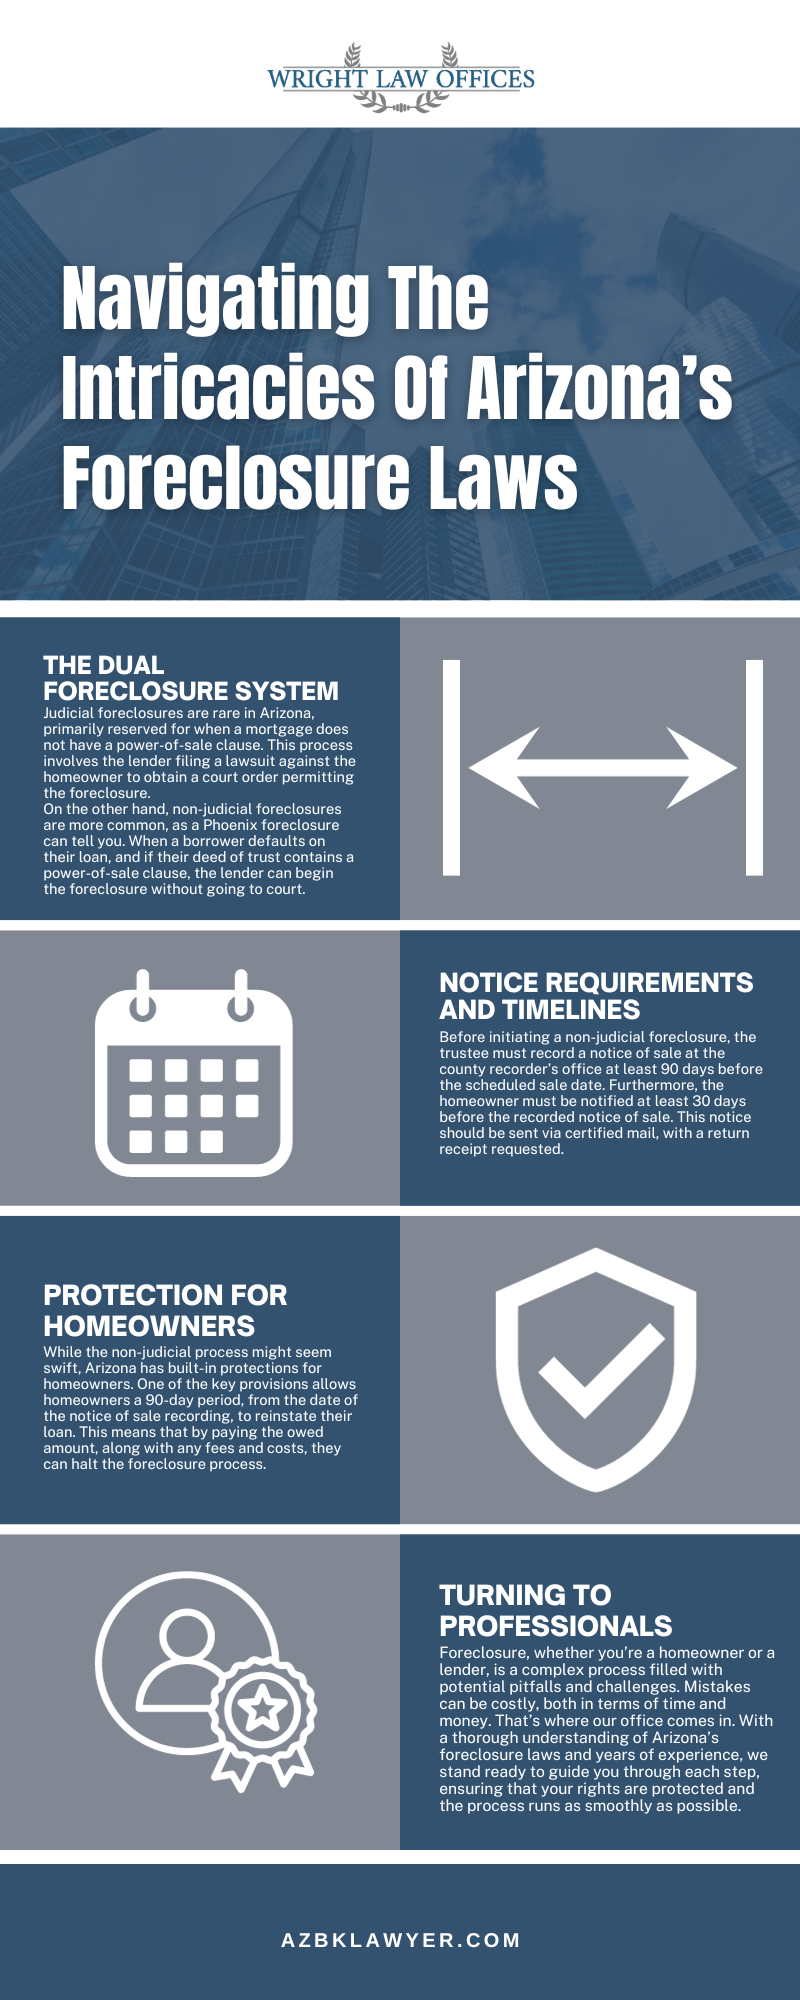 Navigating The Intricacies of Arizona's Foreclosure Laws Infographic